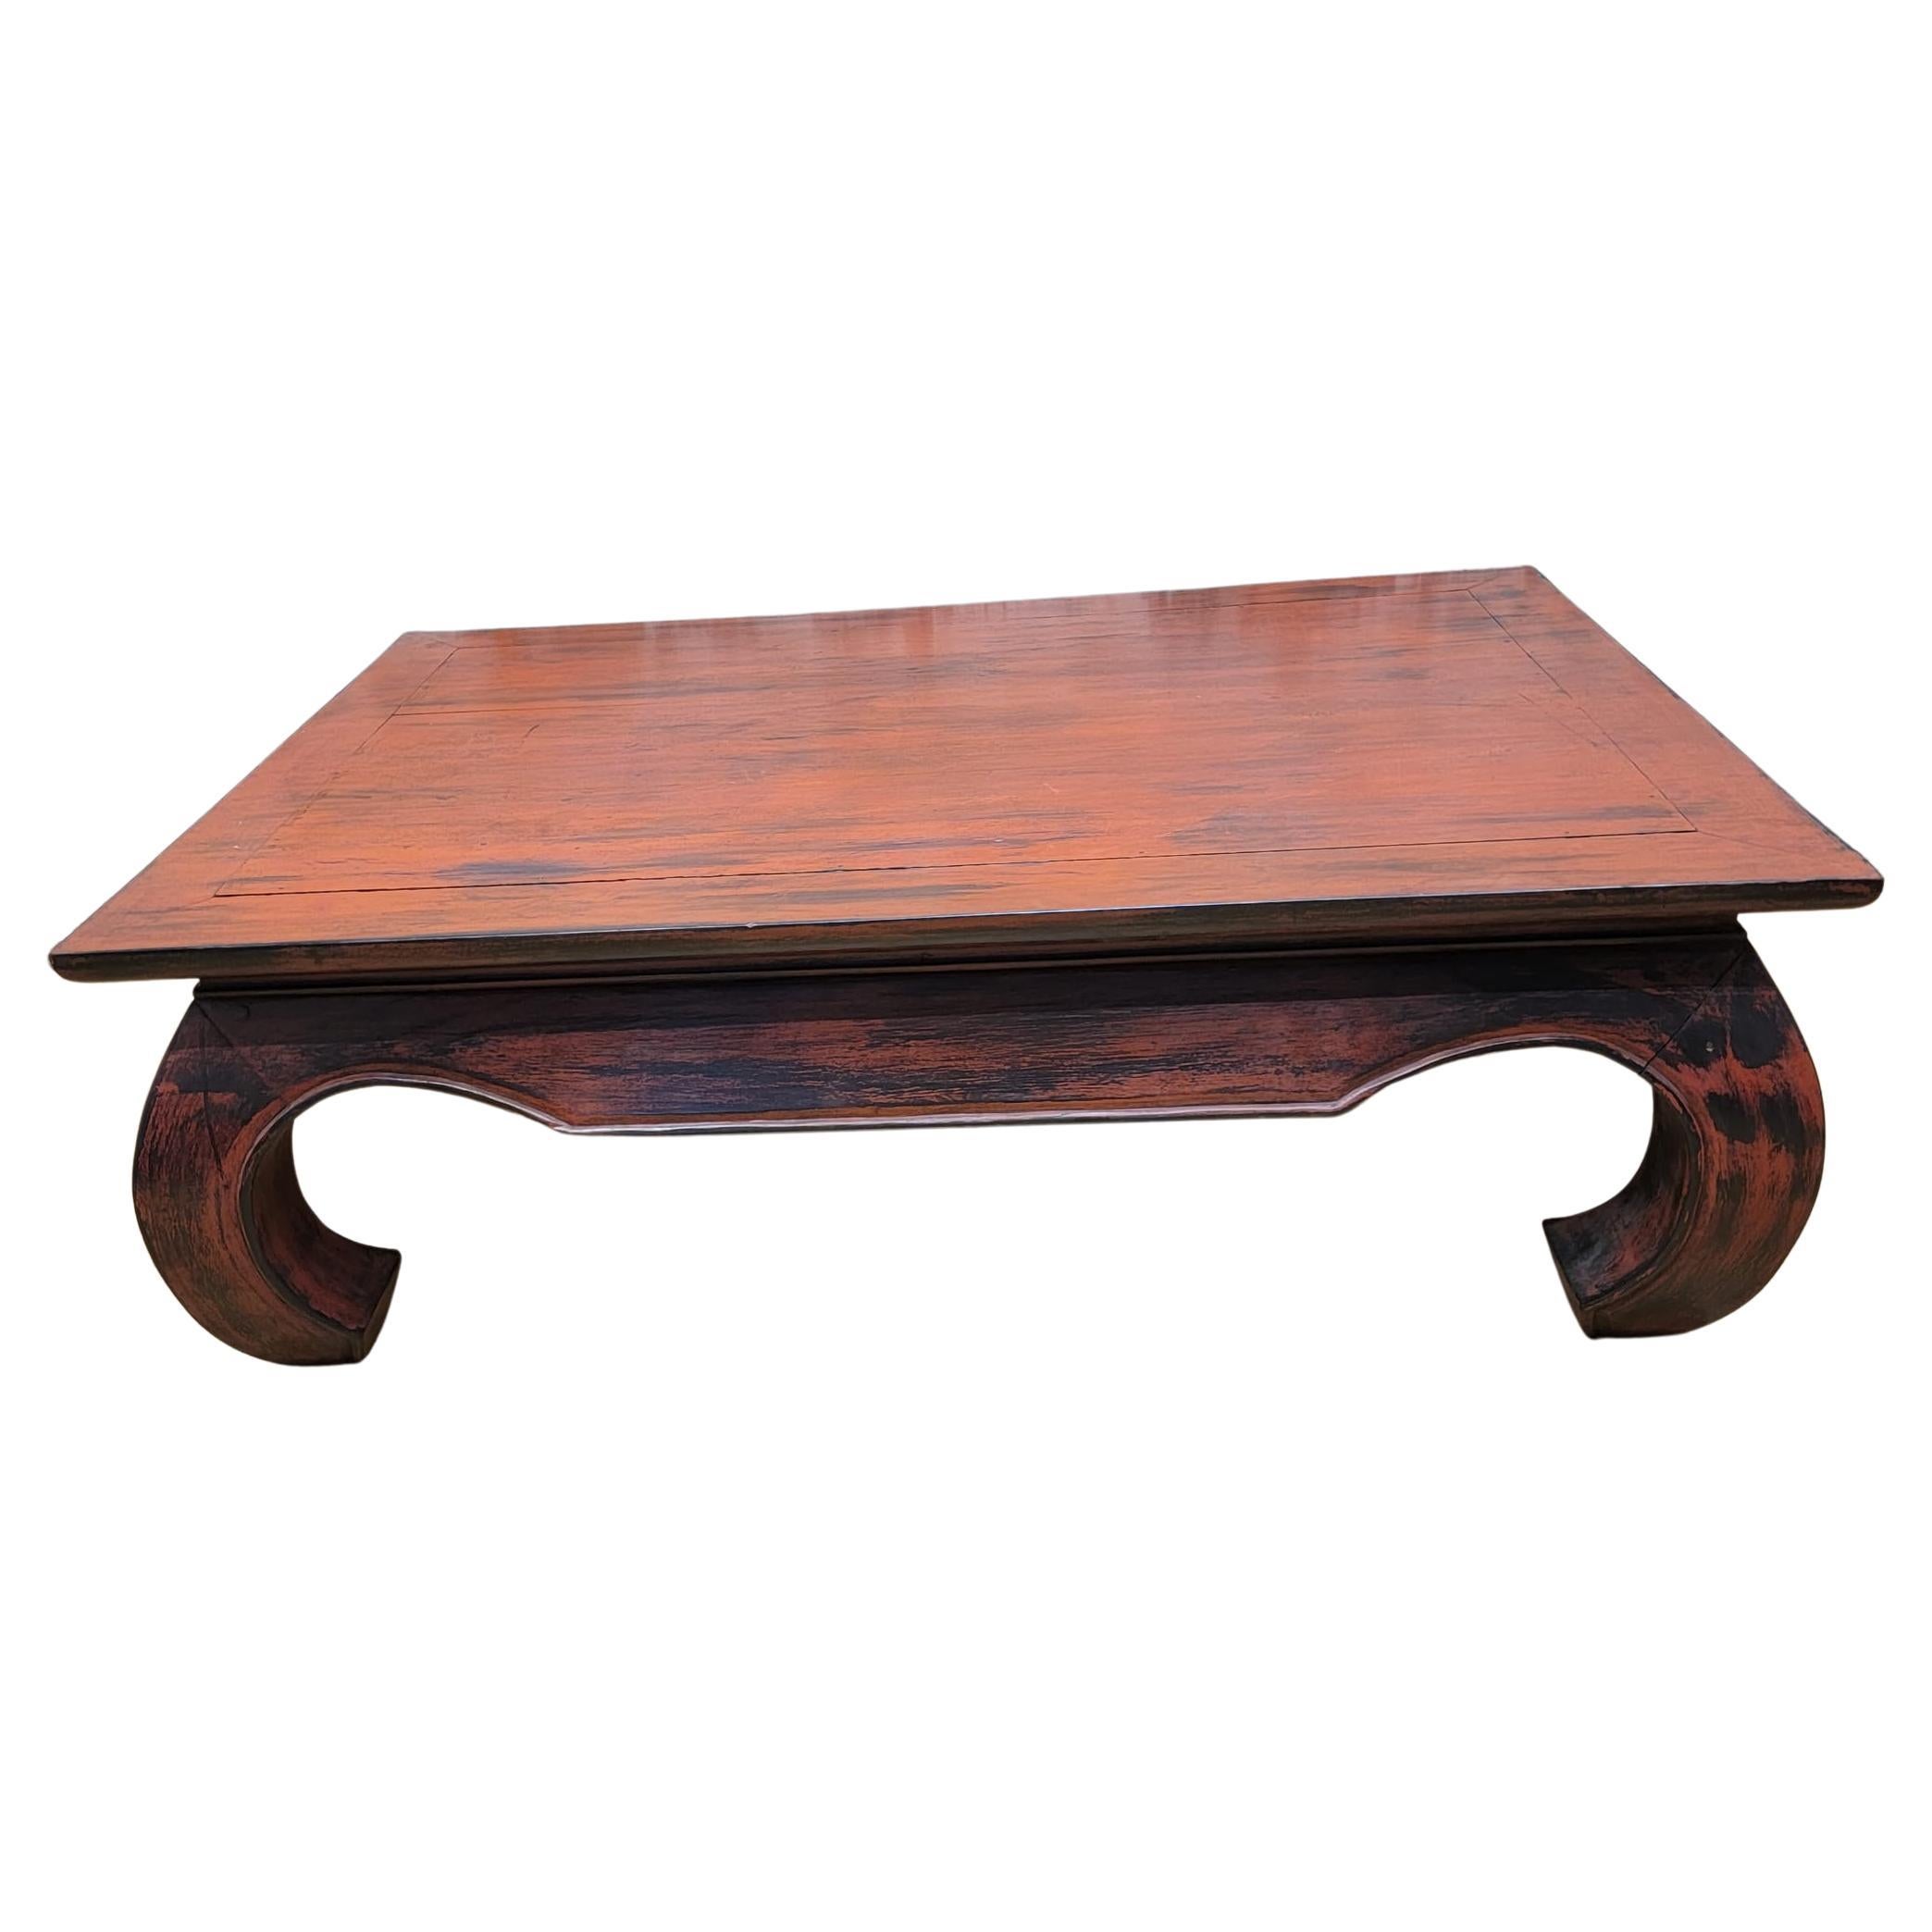 Vintage Kang Style Chinese Teakwood Red Lacquer Coffee Table